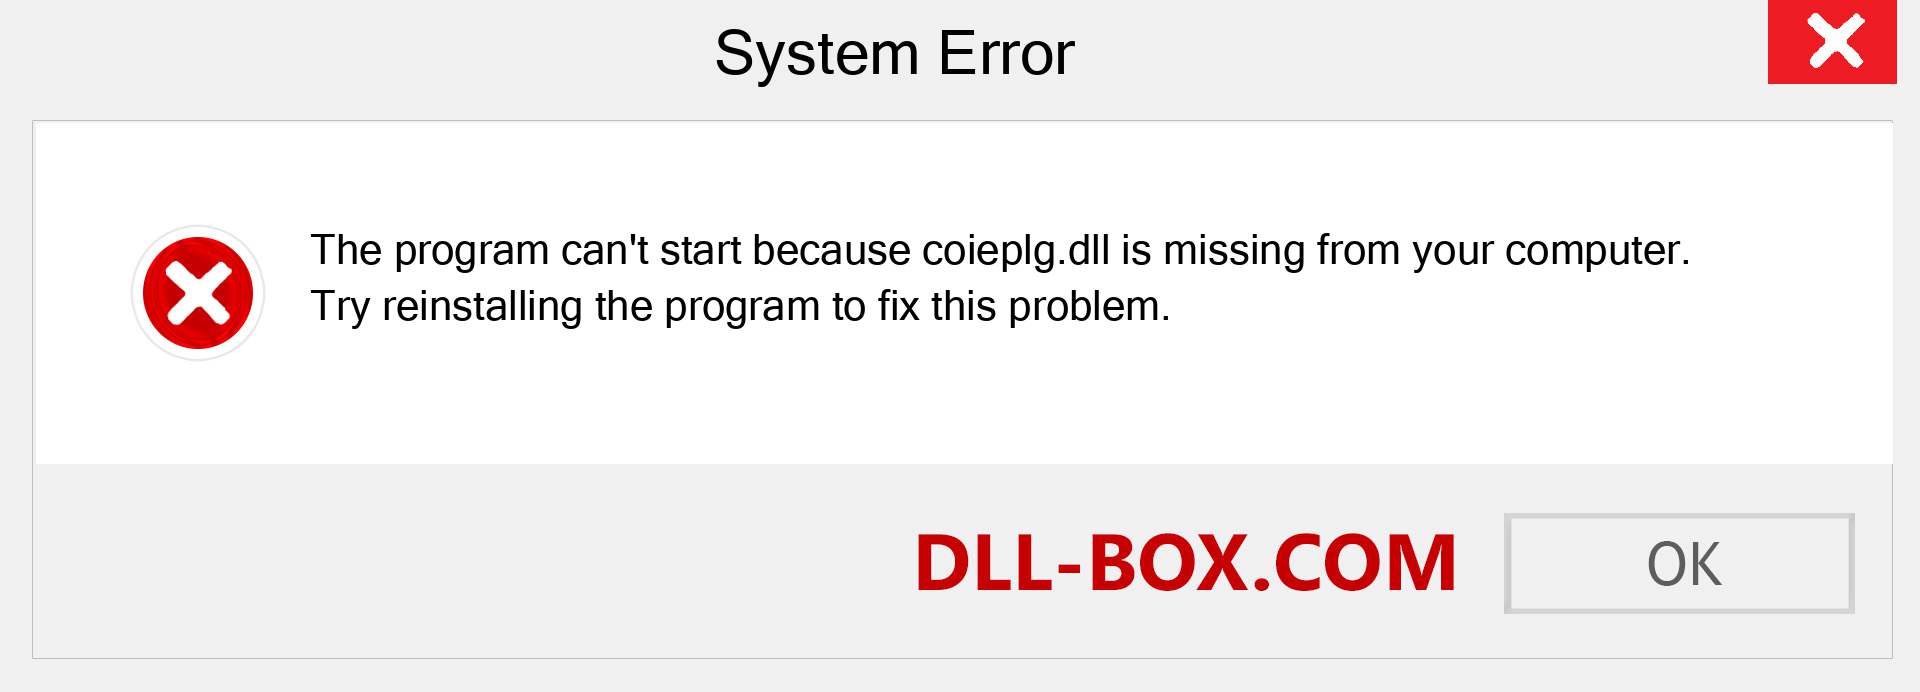  coieplg.dll file is missing?. Download for Windows 7, 8, 10 - Fix  coieplg dll Missing Error on Windows, photos, images